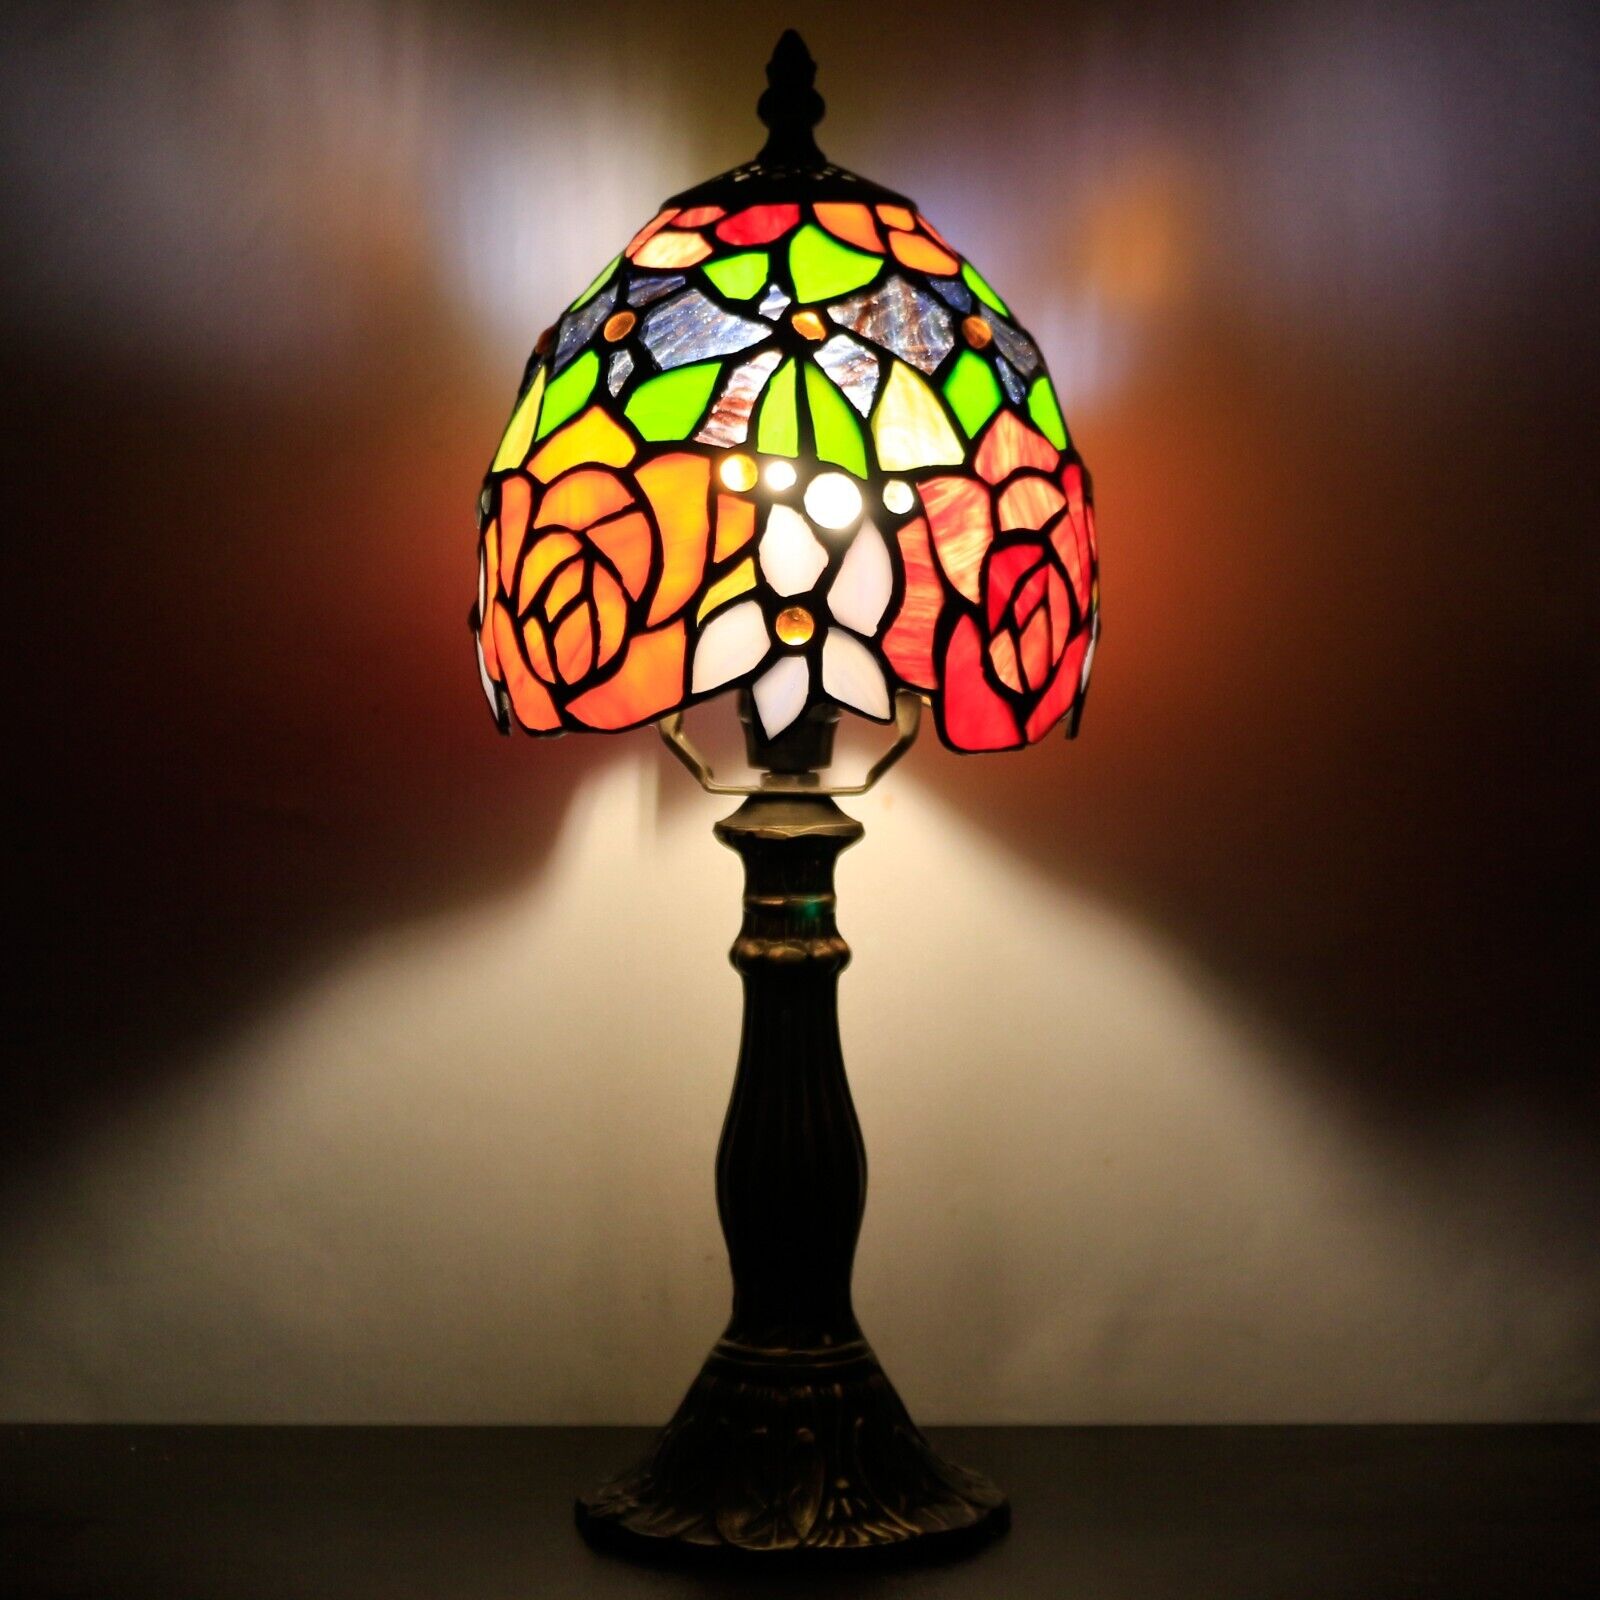 Small Tiffany Table Lamp Red Yellow Rose Style Stained Glass Desk Lamp 6 inch